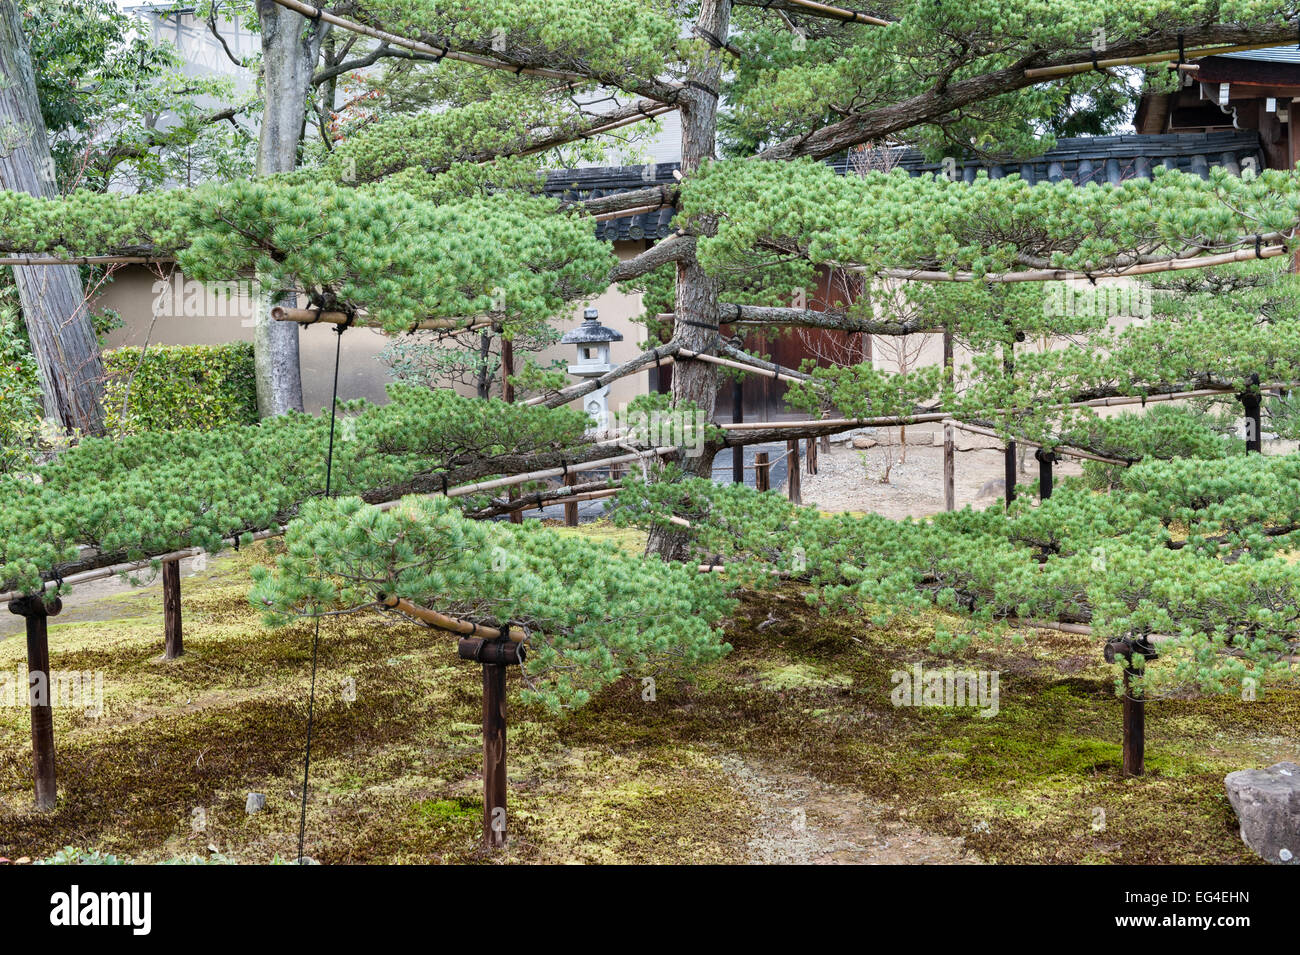 Kyoto, Japan. Training the branches of a young Japanese pine tree with bamboo canes, wooden props and rope Stock Photo